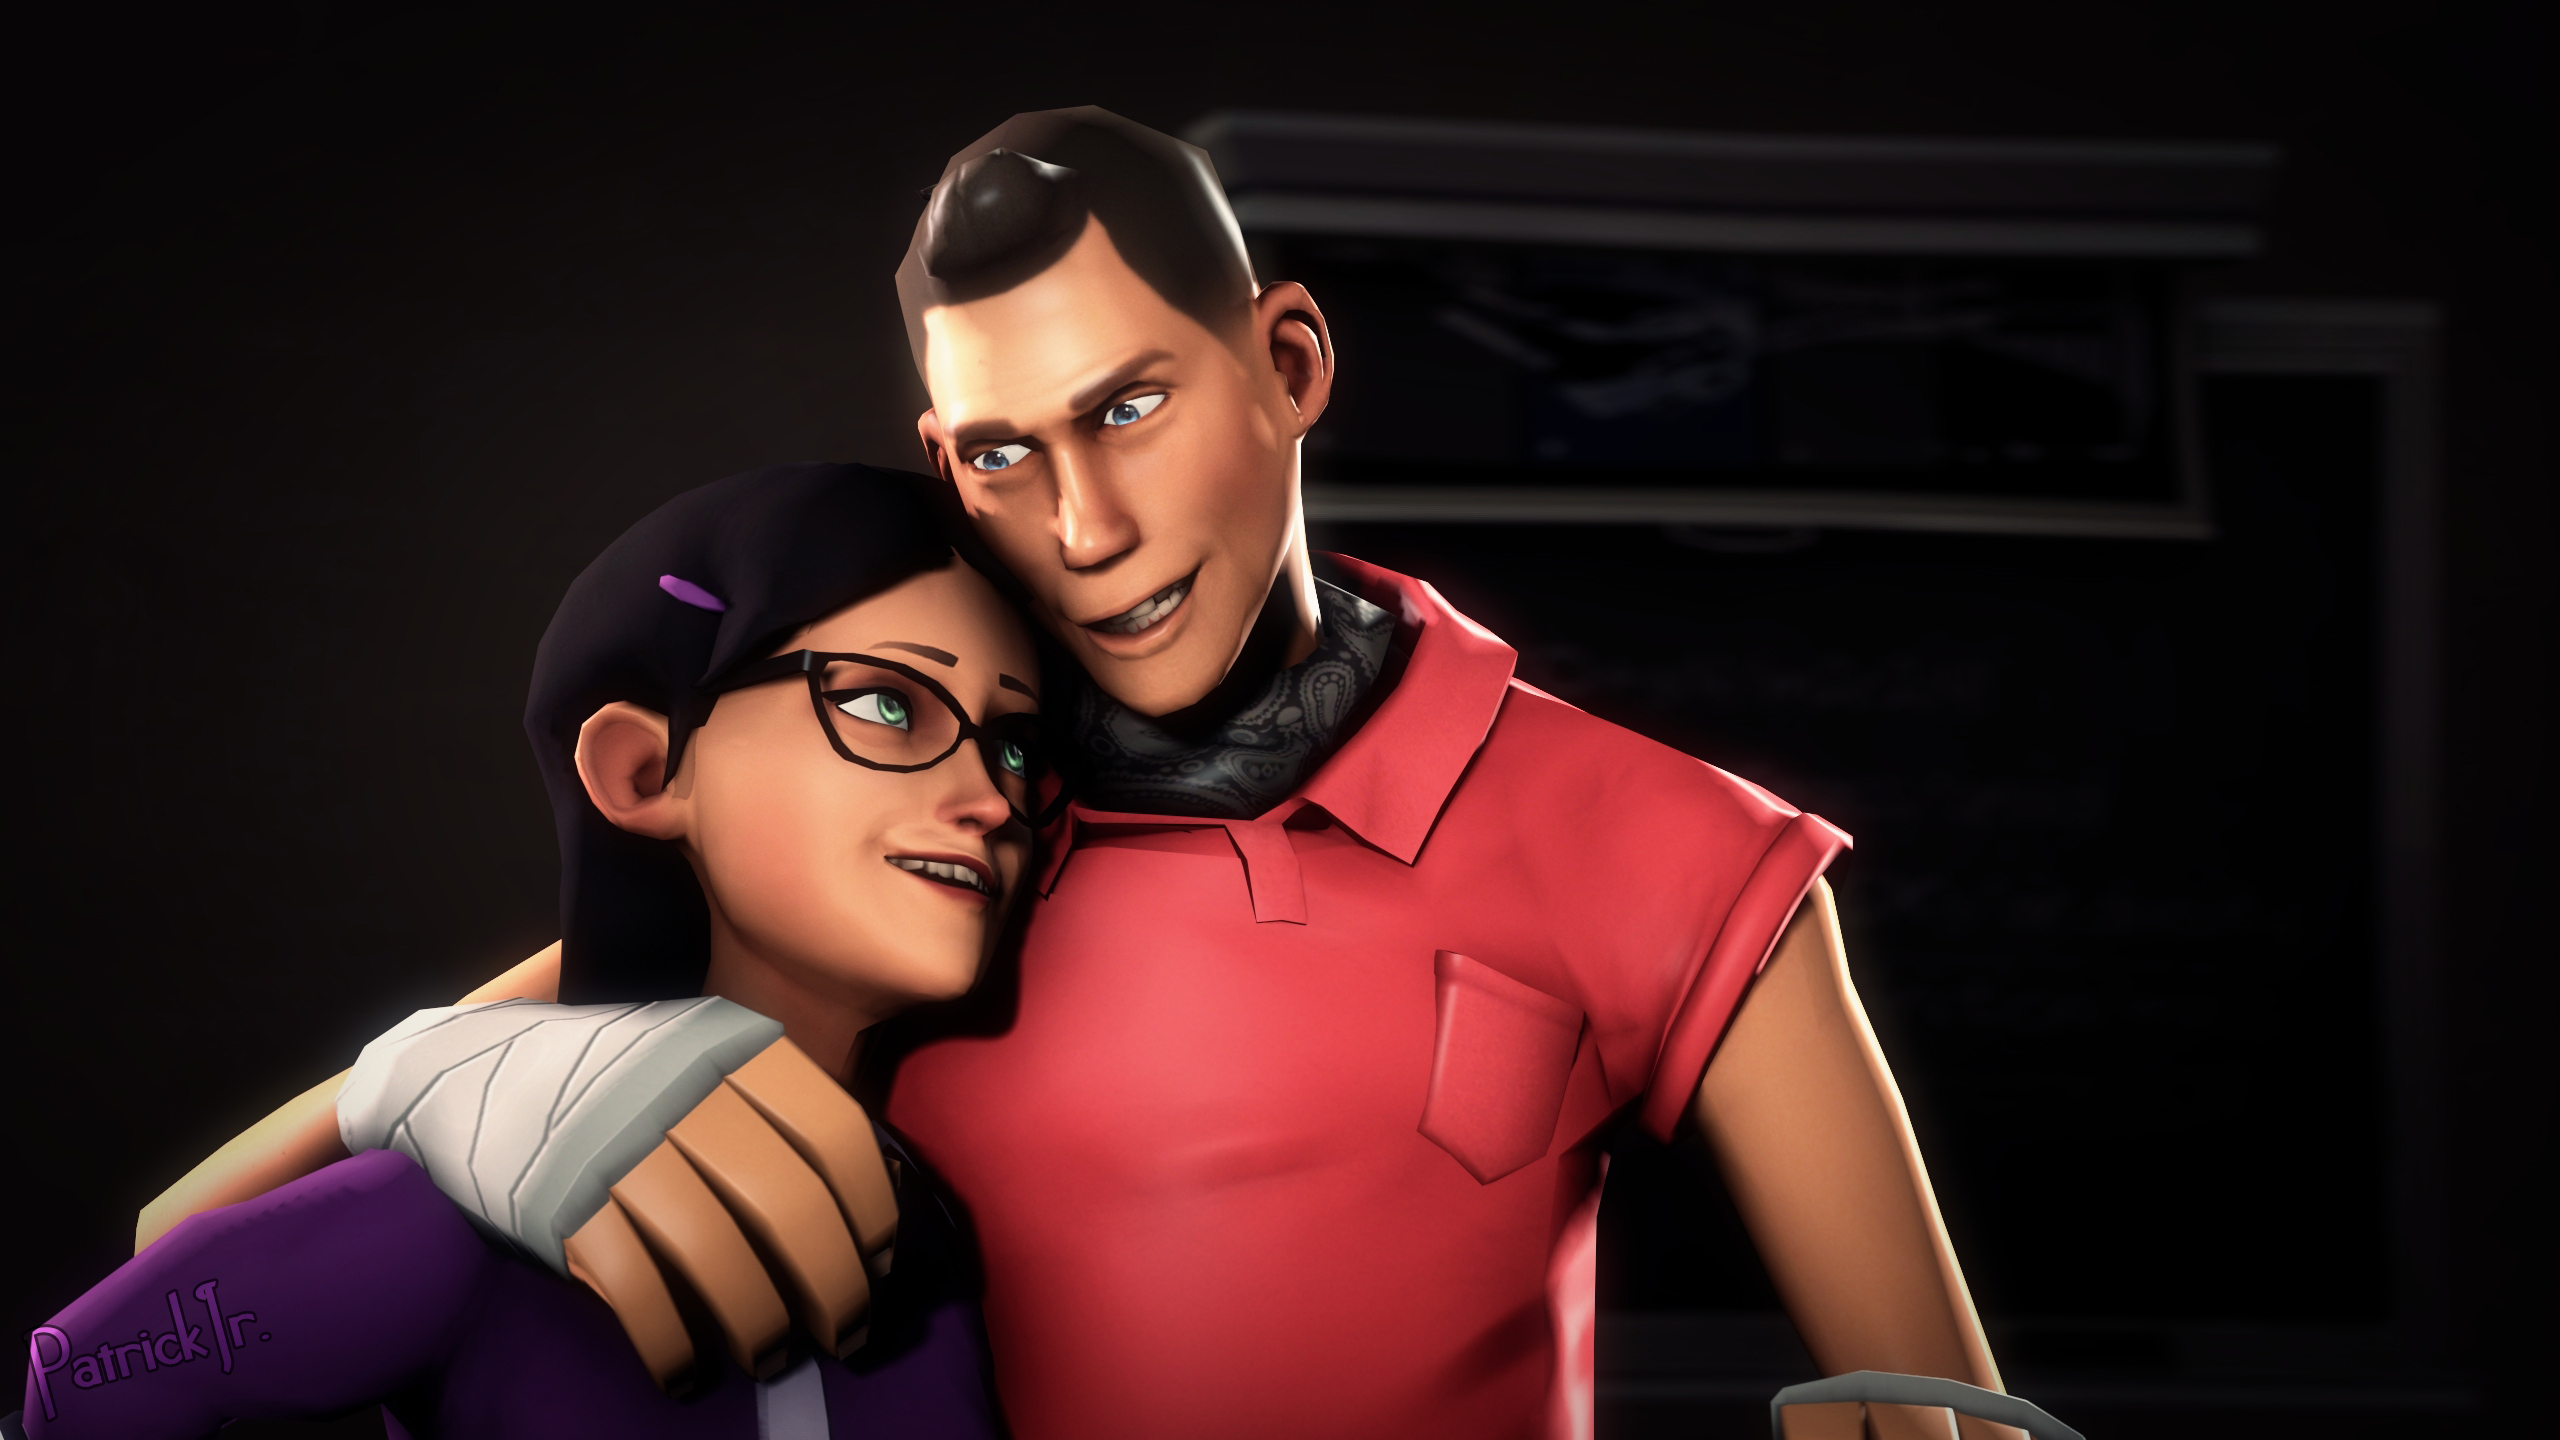 SFM Poster: Miss Pauling and Scout by PatrickJr on DeviantArt. source: orig...